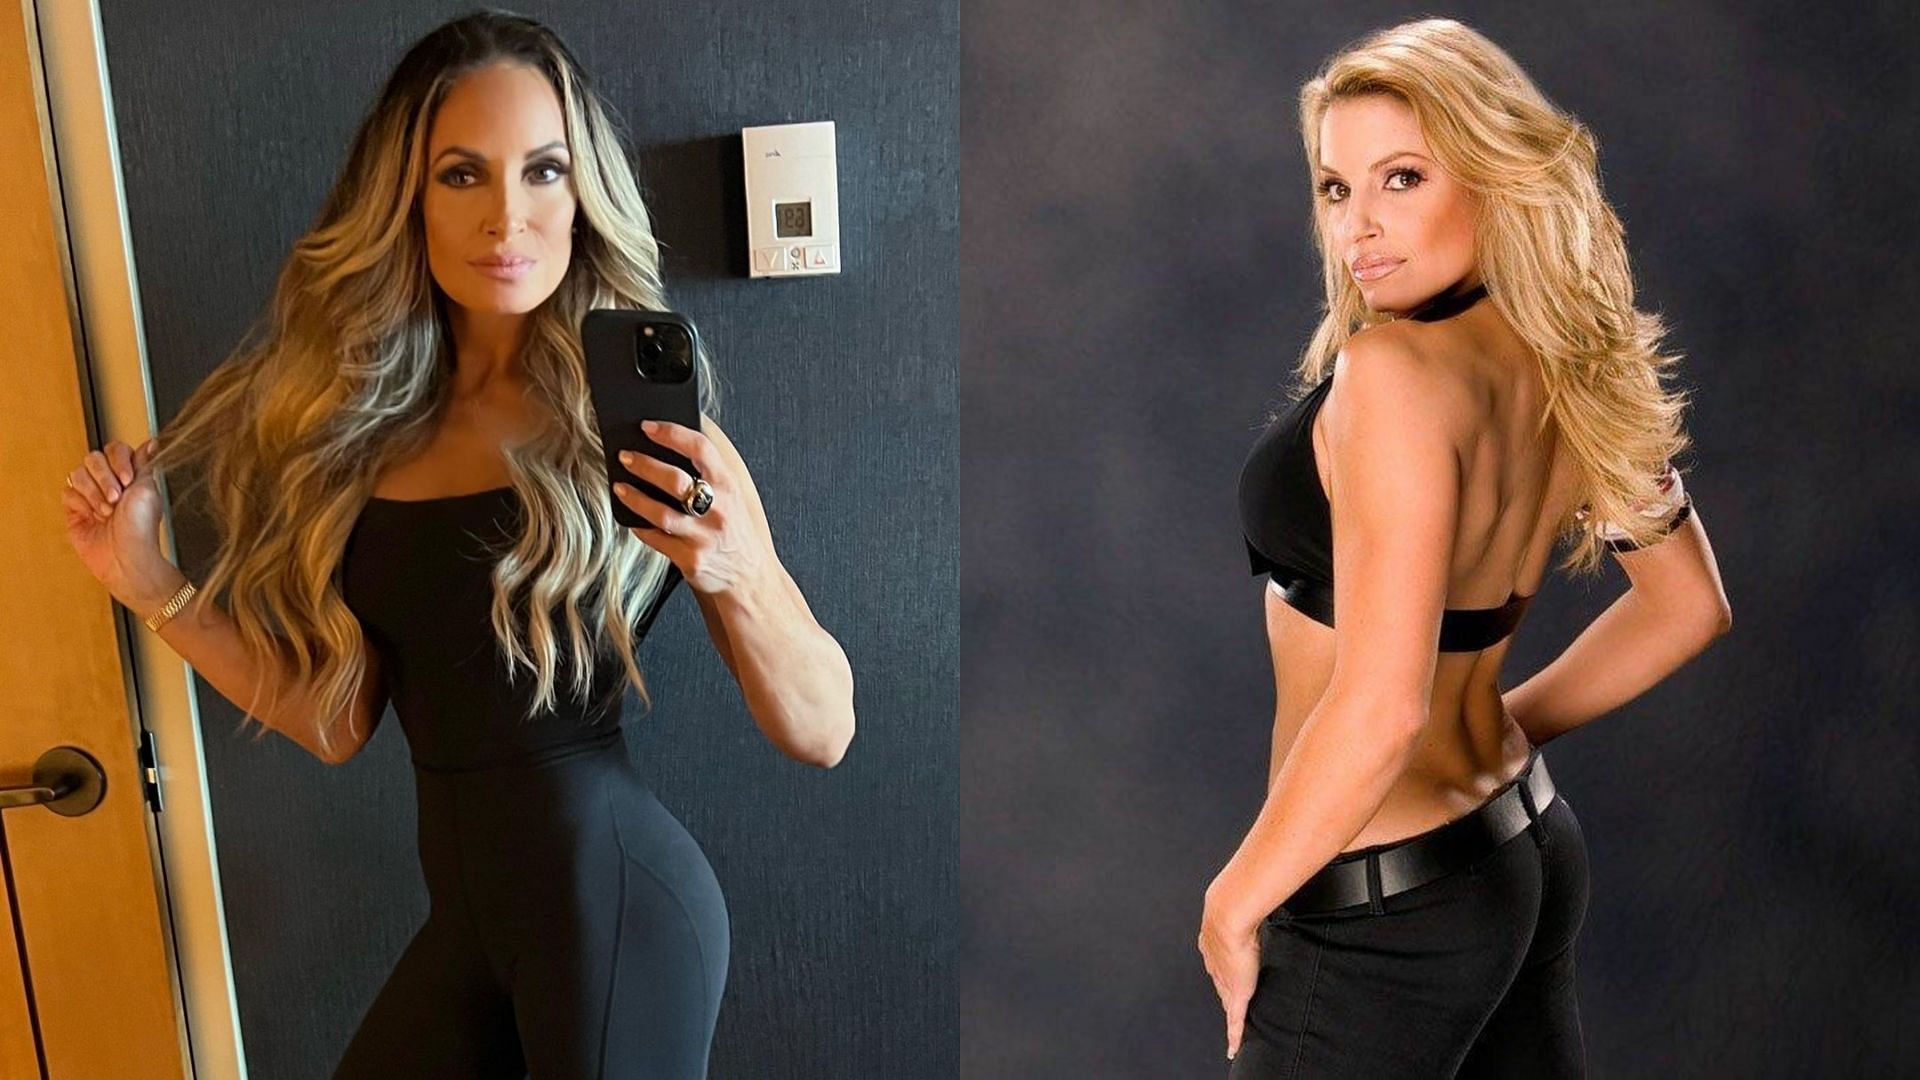 WWE Hall of Famer Trish Stratus is now in the best shape of her life